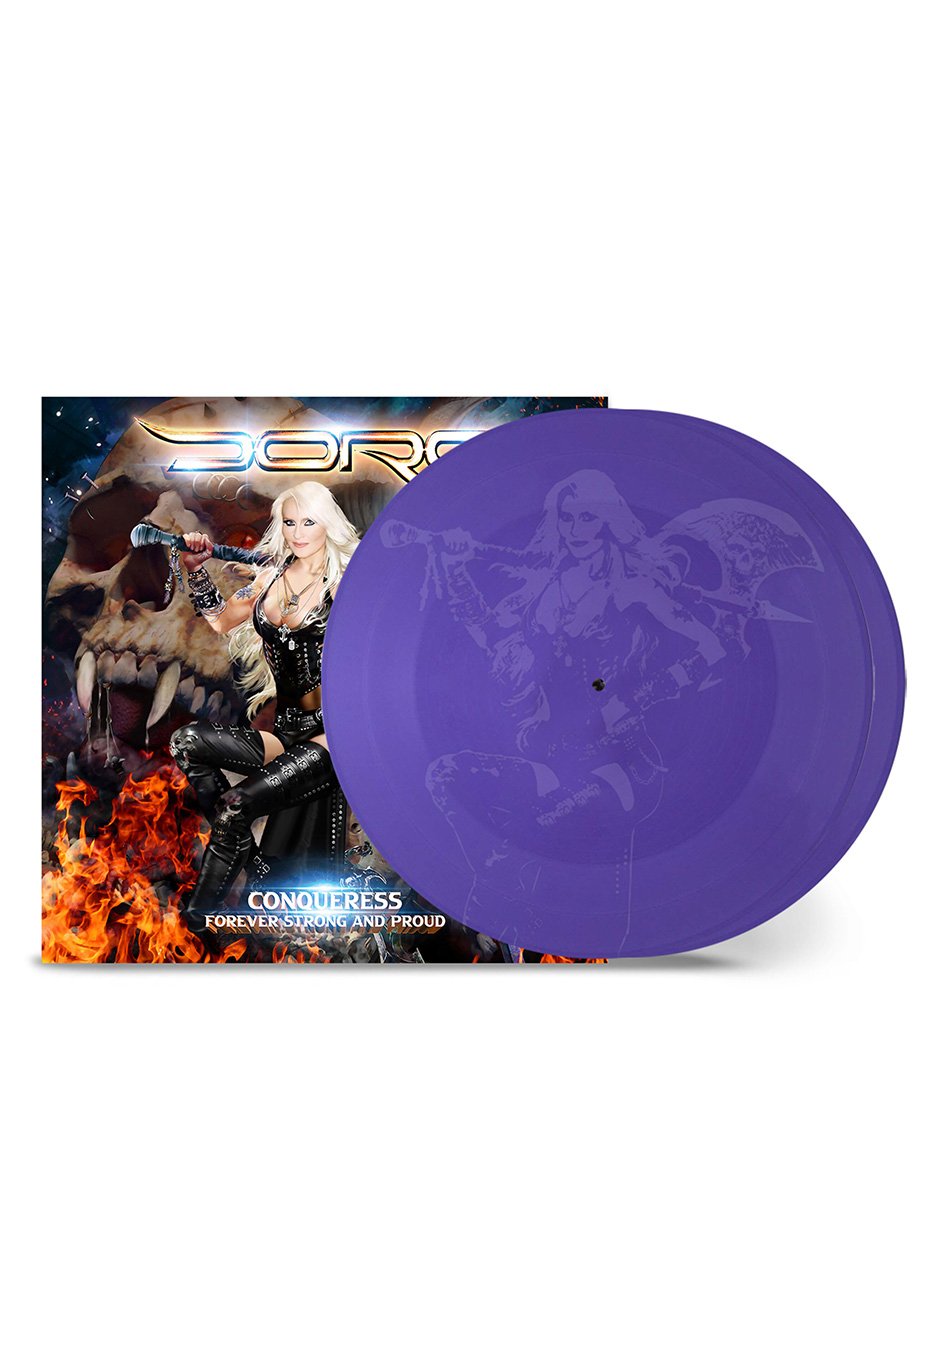 Doro - Conqueress - Forever Strong And Proud Ltd. Purple - Colored 2 Vinyl